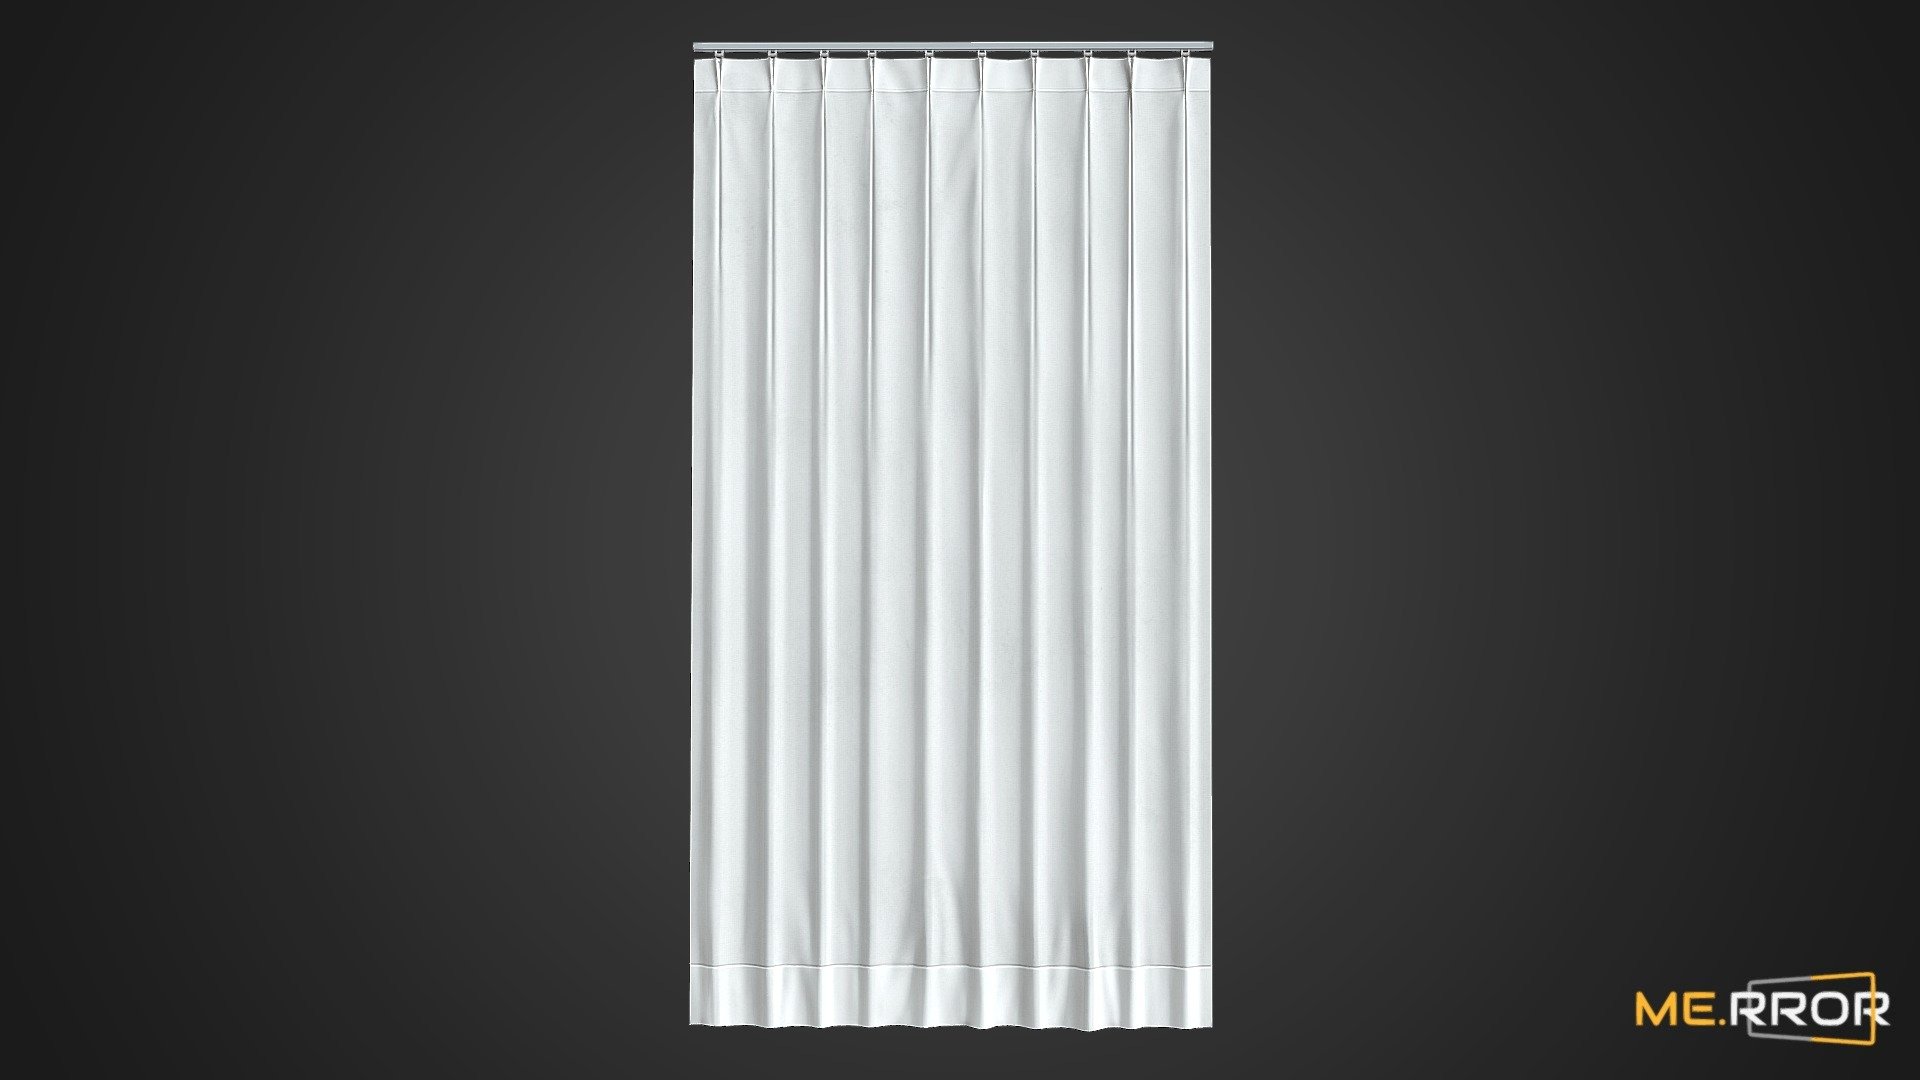 MERROR is a 3D Content PLATFORM which introduces various Asian assets to the 3D world


3DScanning #Photogrametry #ME.RROR - [Game-Ready] White Pleated Curtains - Buy Royalty Free 3D model by ME.RROR Studio (@merror) 3d model